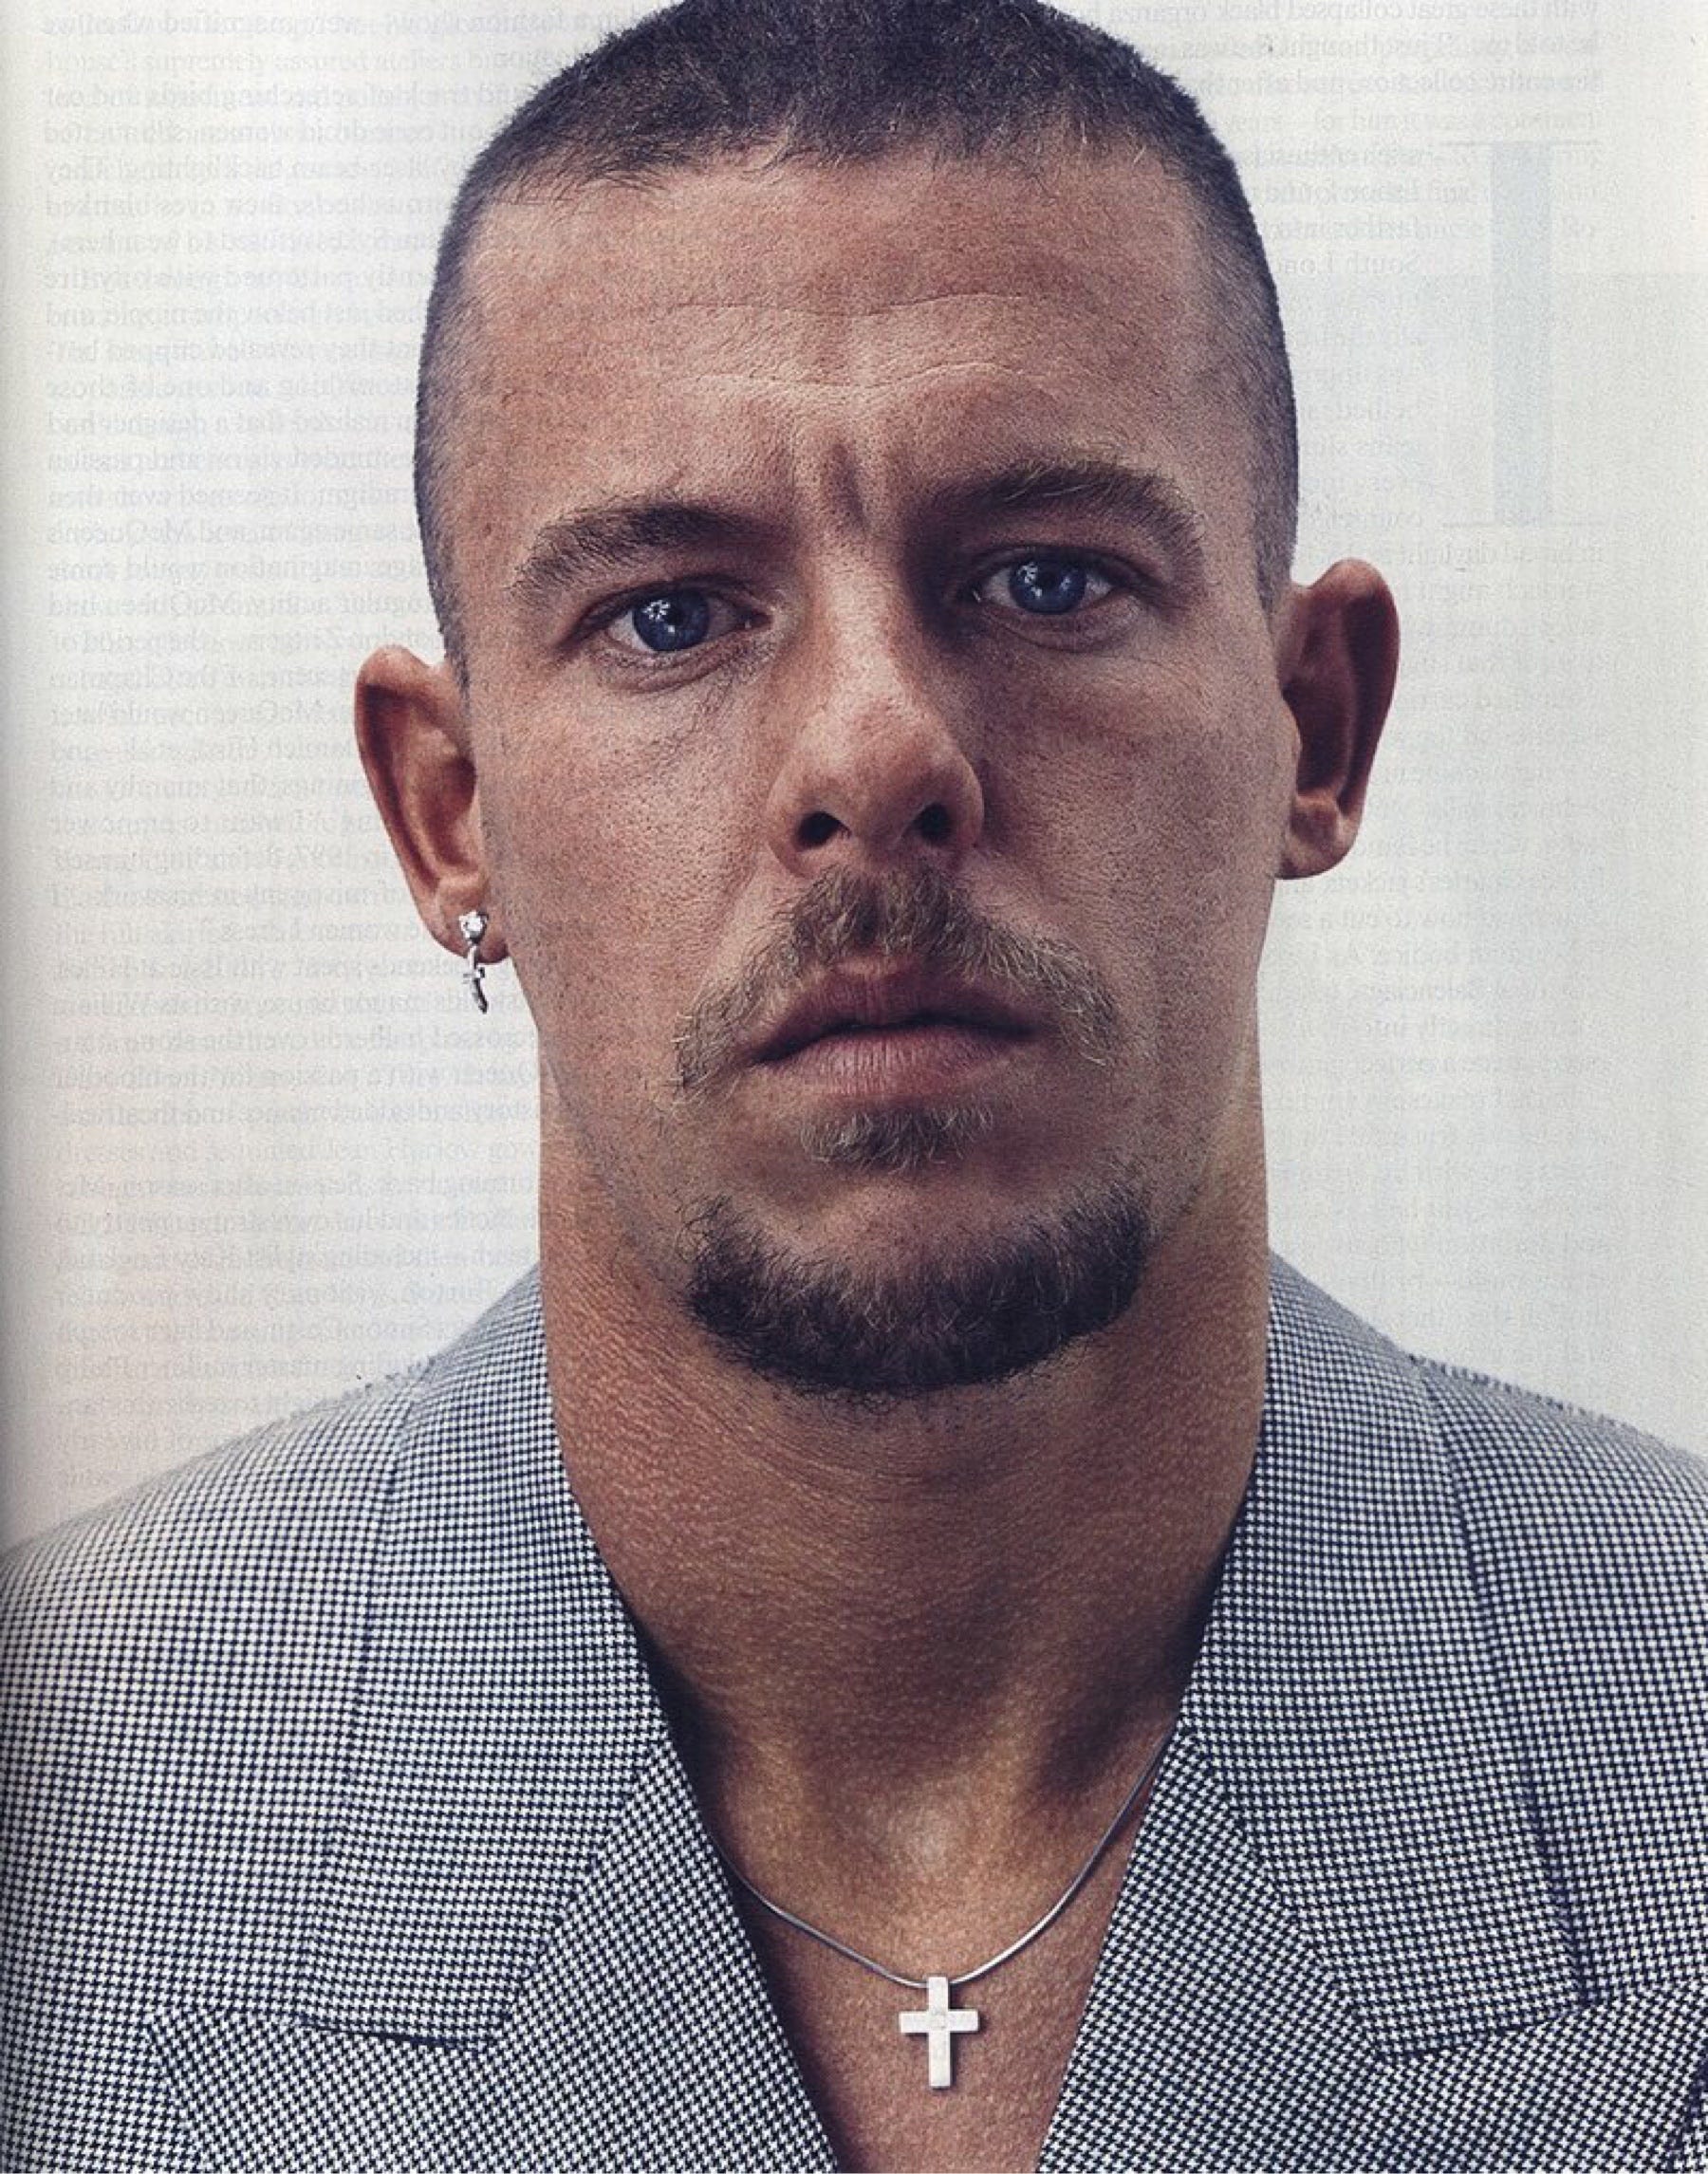 Alexander McQueen: The Life and Legacy 